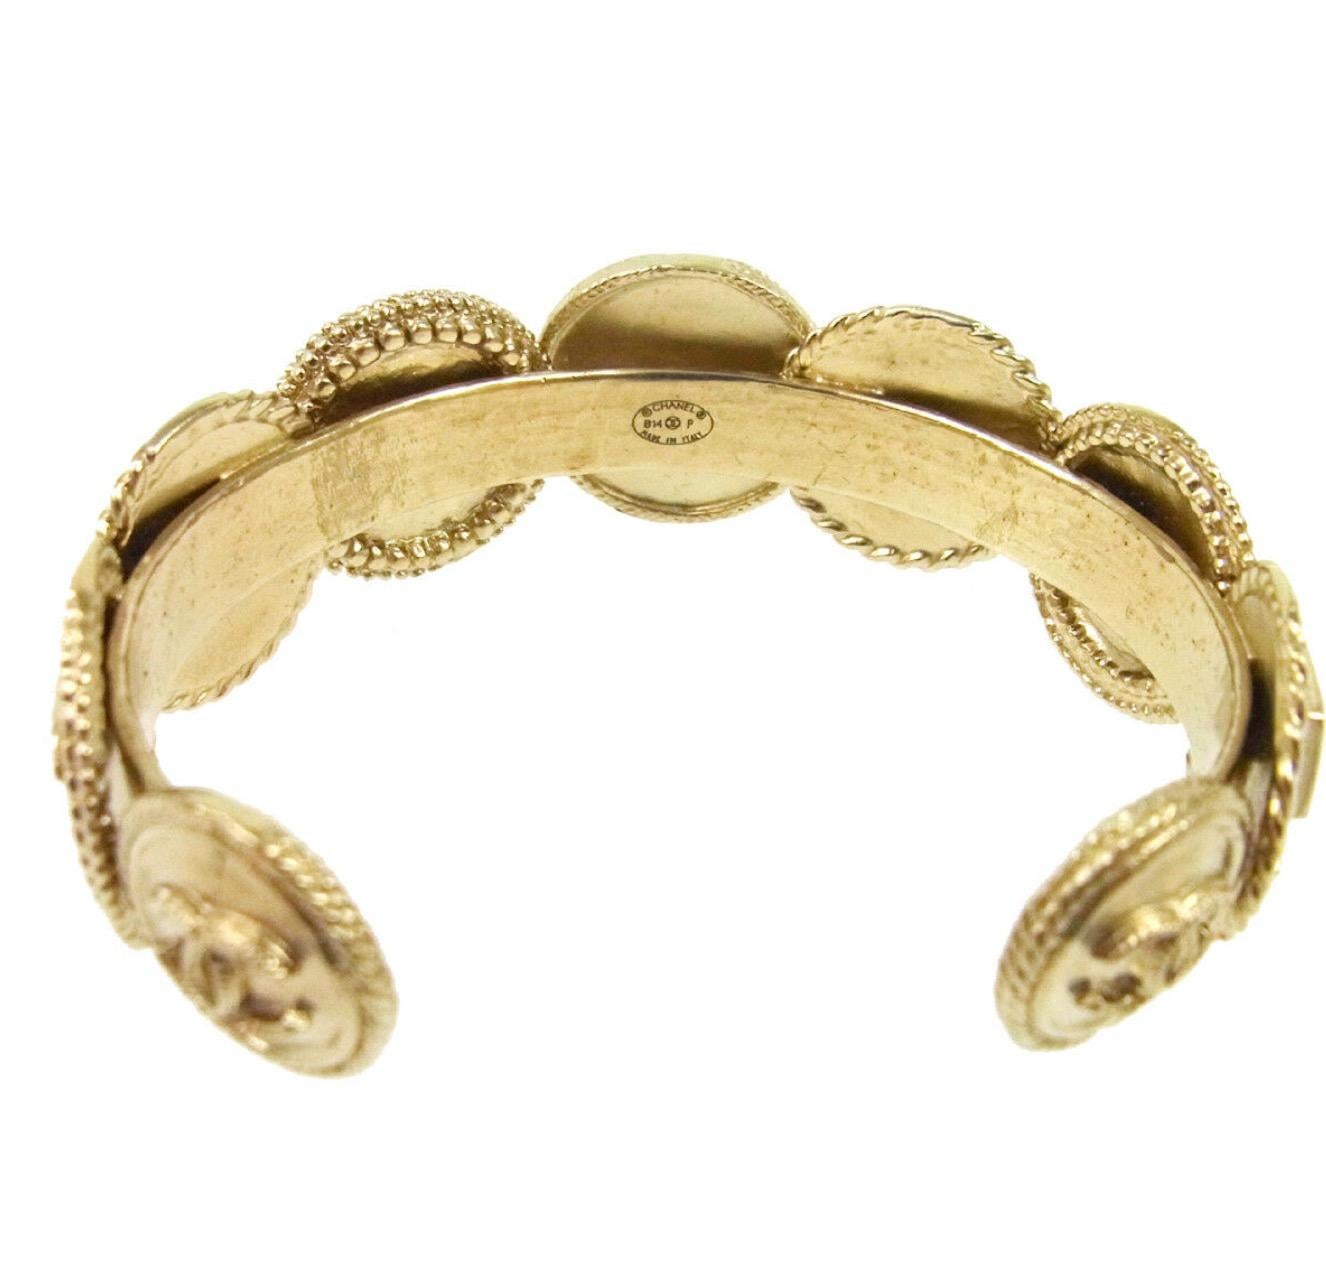 Women's Chanel Champagne Gold Textured Coin Charm Evening Cuff Bracelet in Box